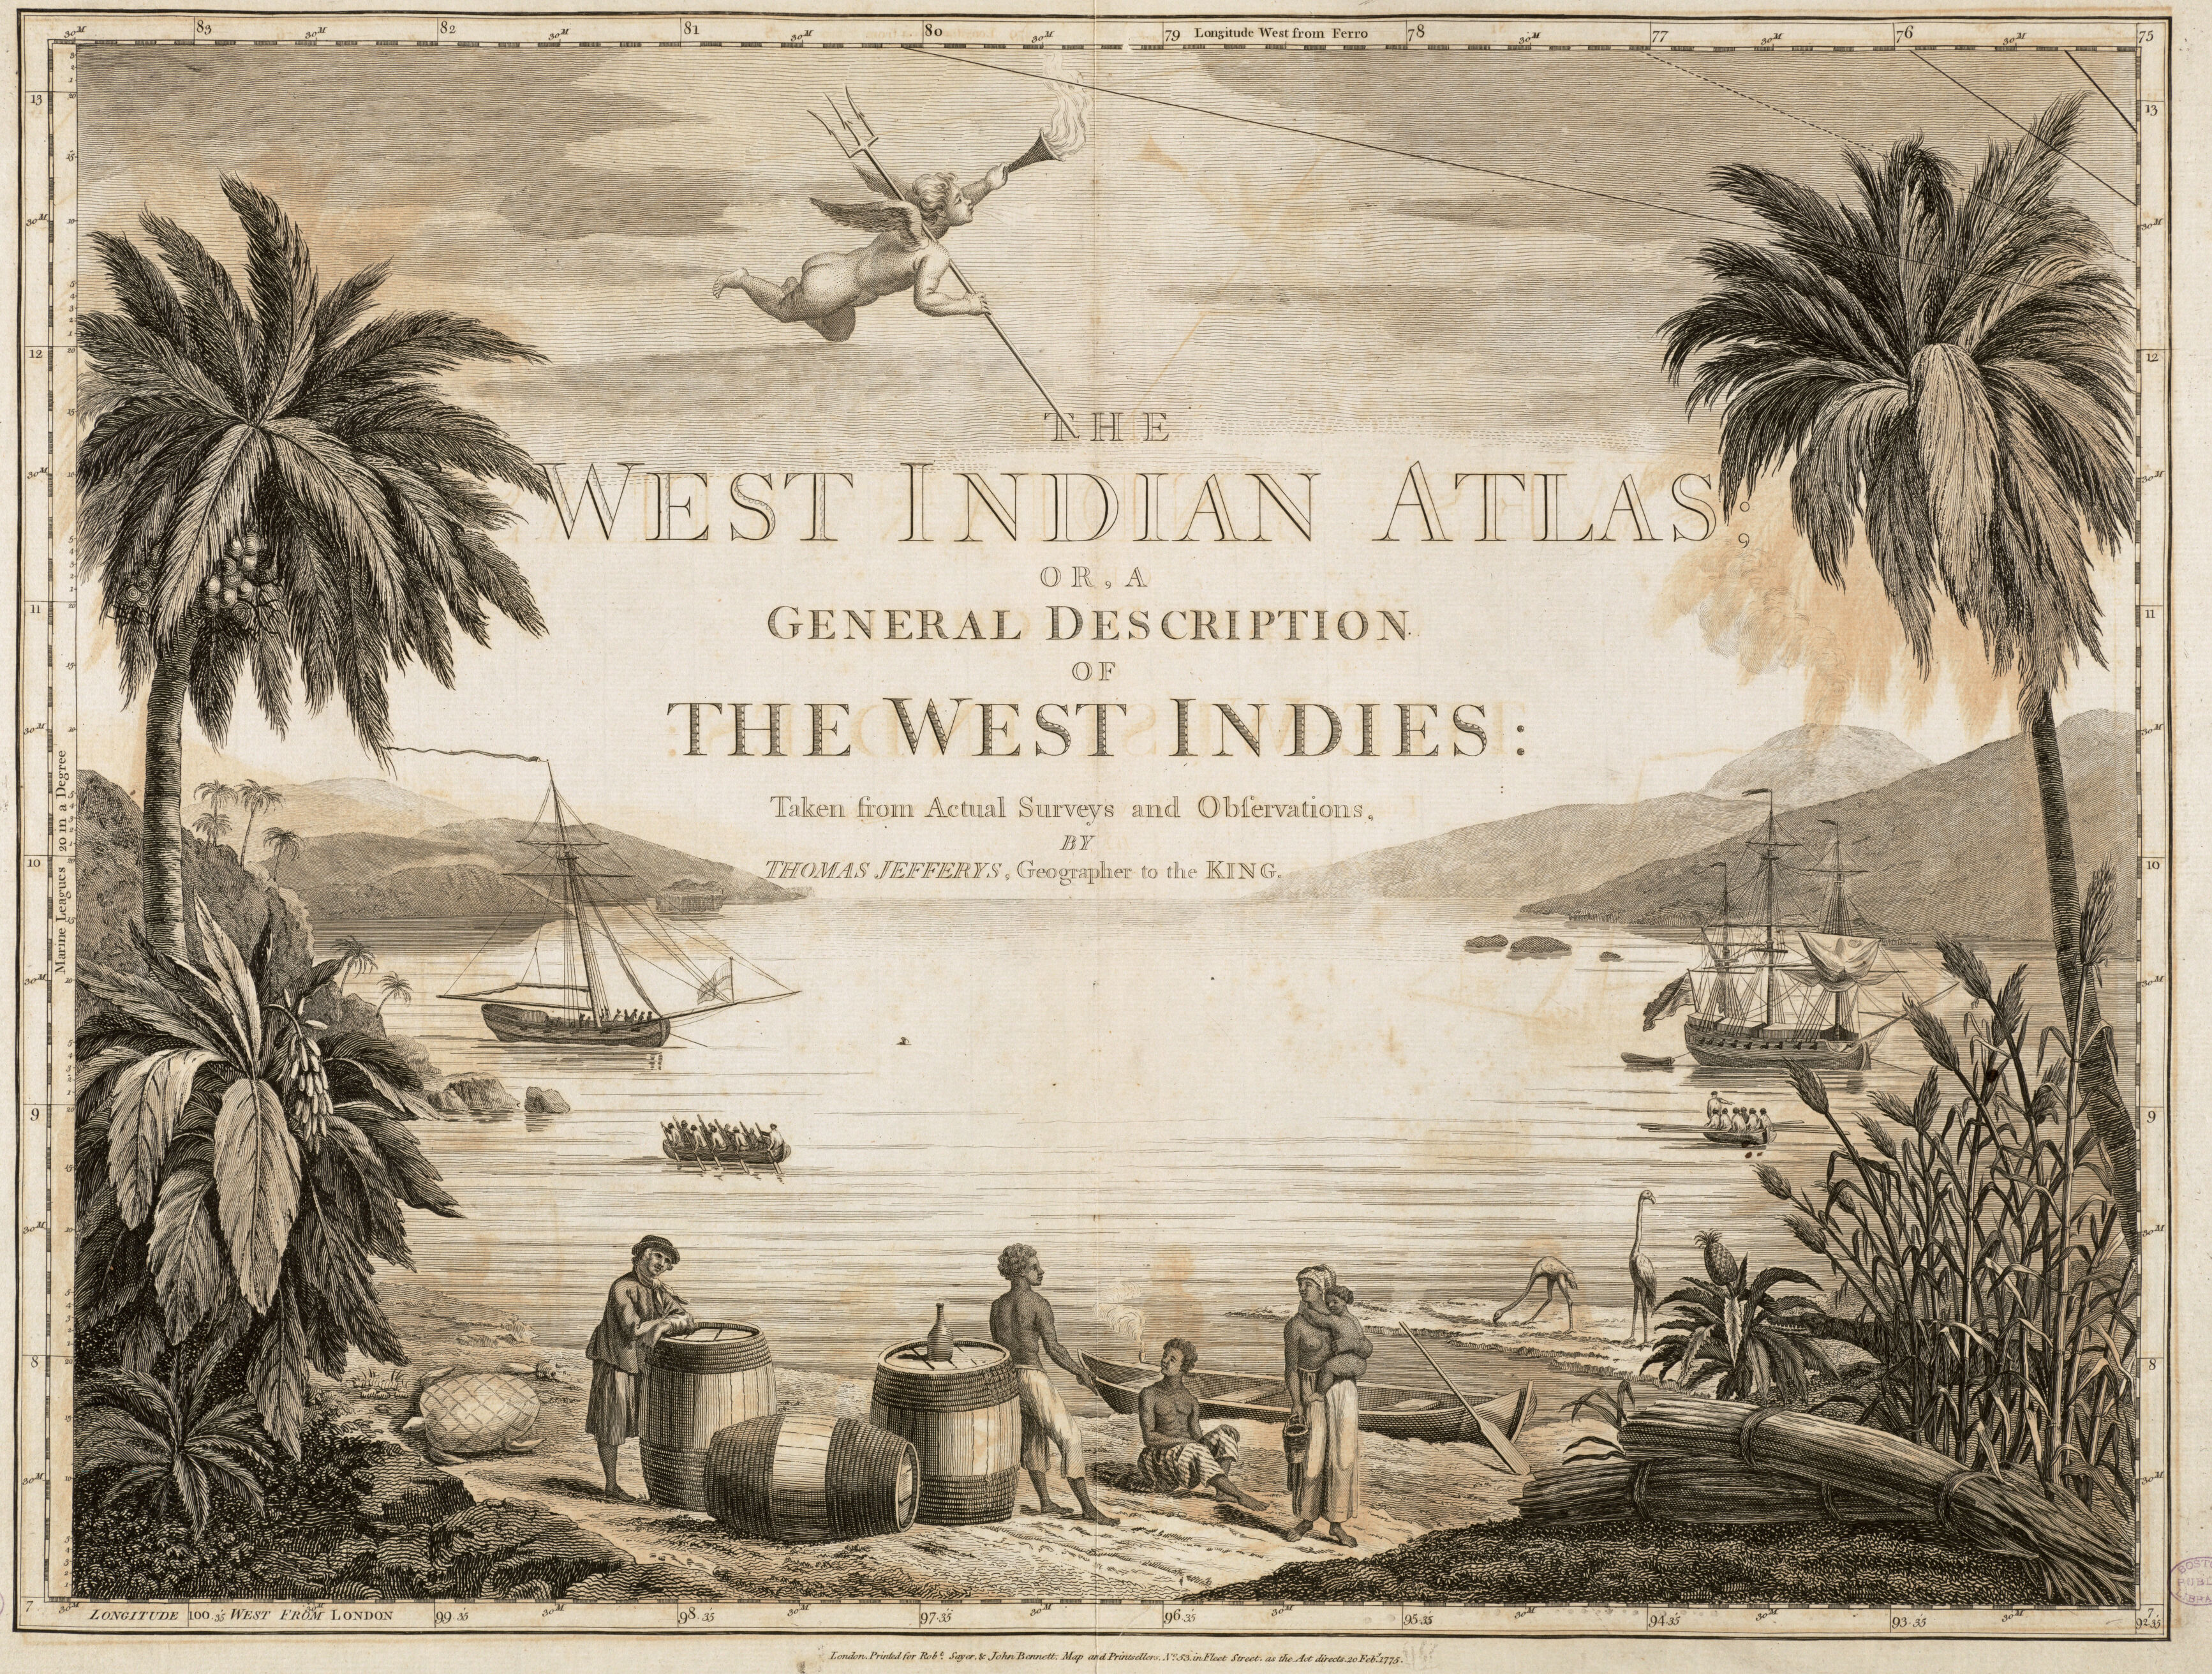 An engraved image showing a romanticised image of life in the West Indies, including enslaved people, sugar cane, and several boats and ships in a bay.